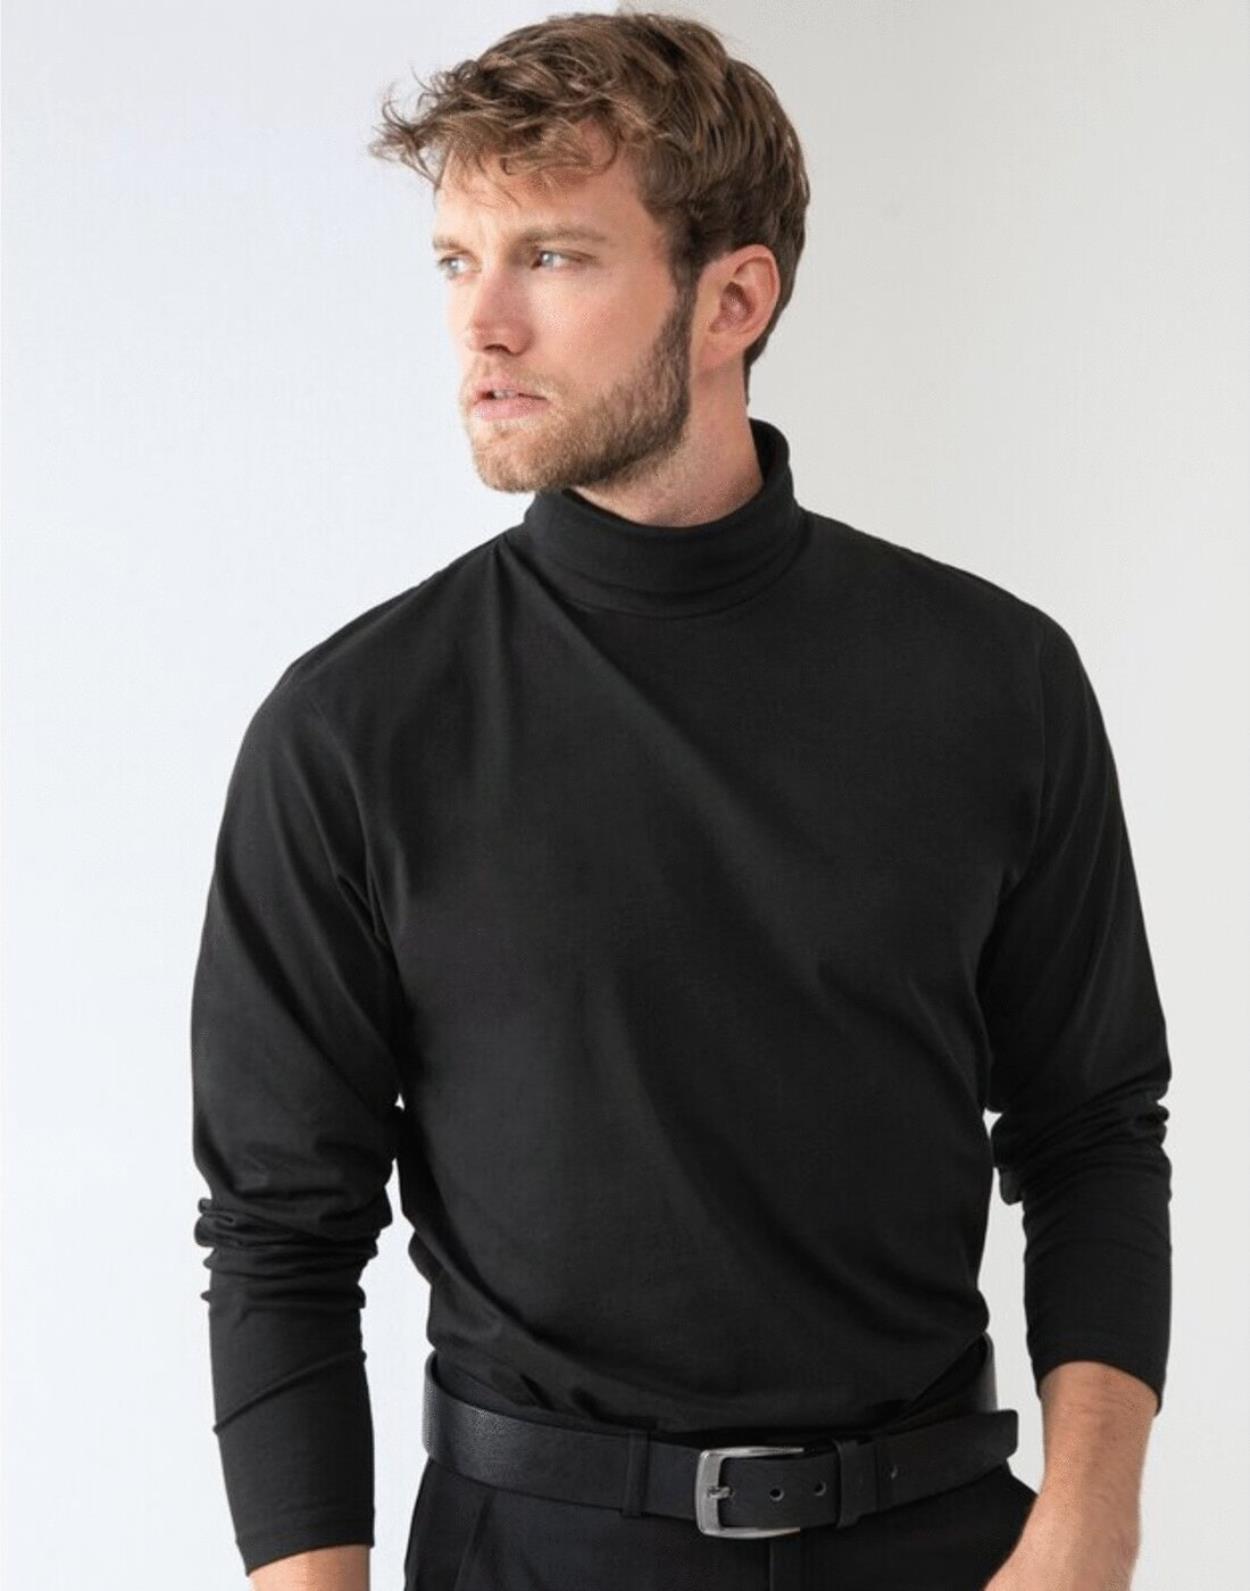 H020 Roll Neck Long Sleeve Top secondary Image